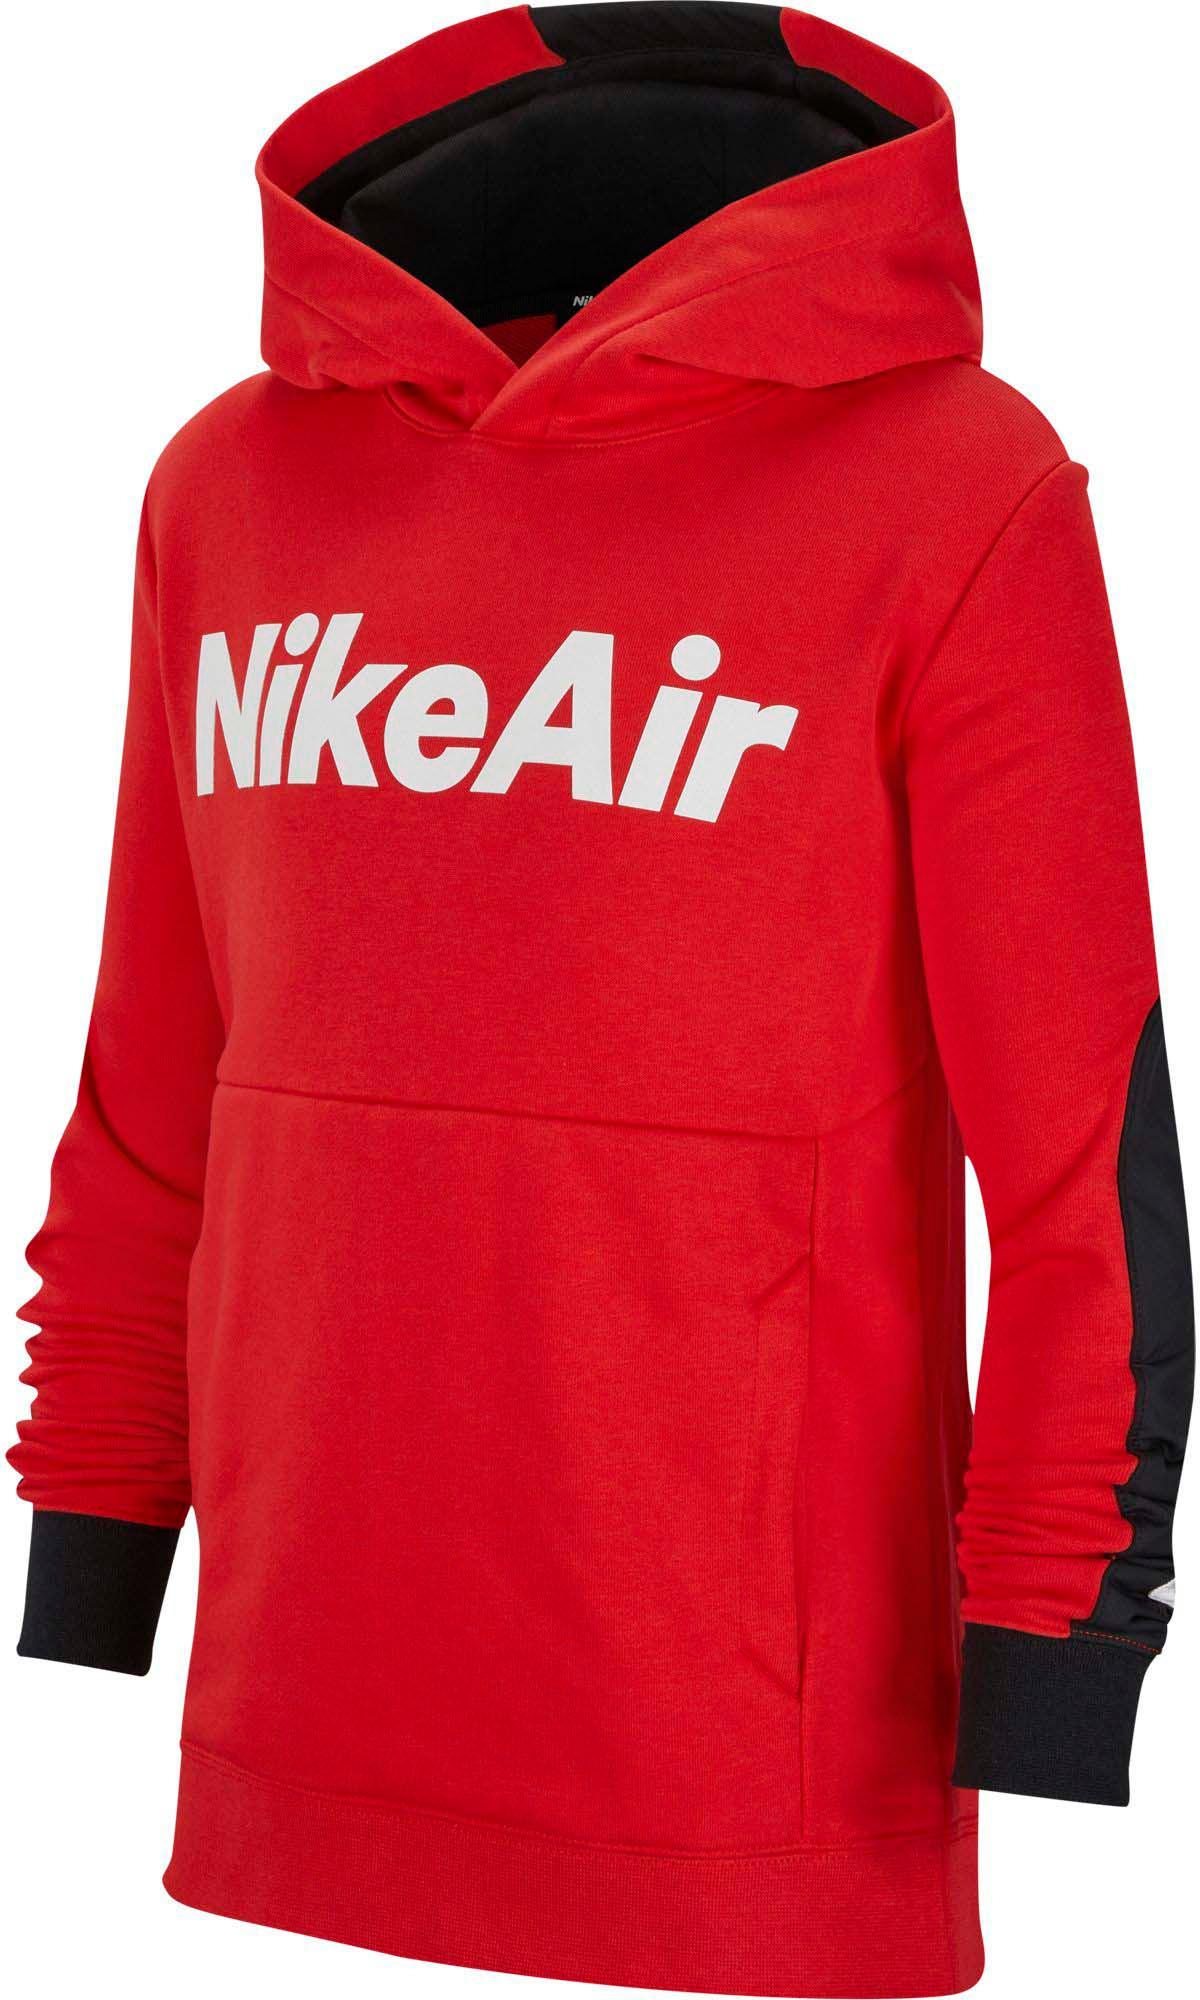 red black and white nike jacket